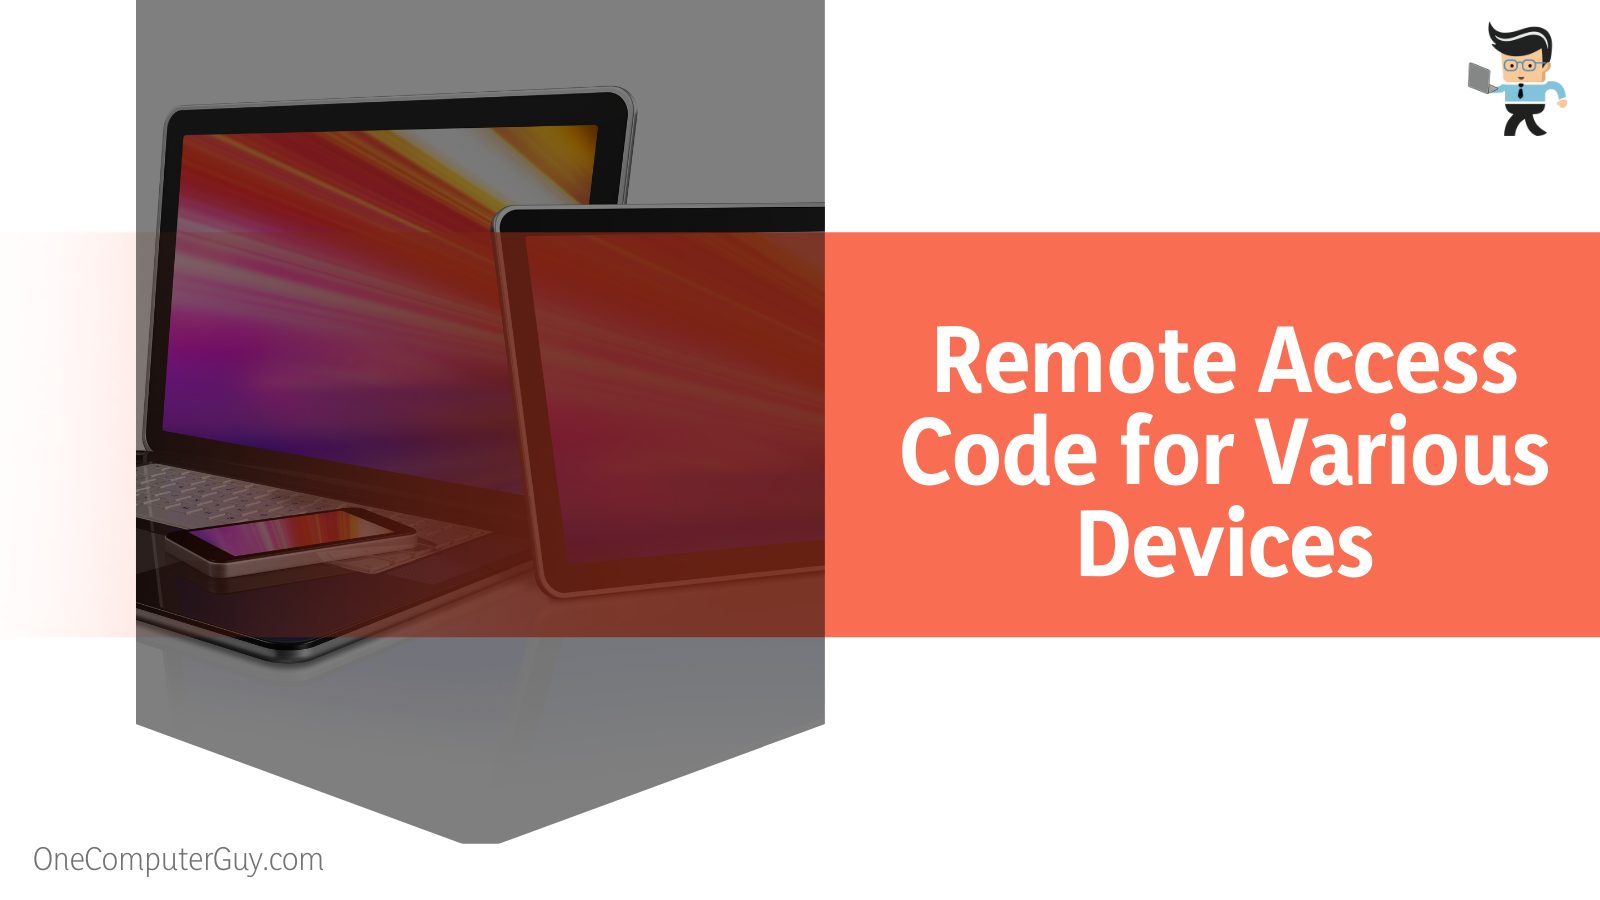 Remote Access Code for Various Devices